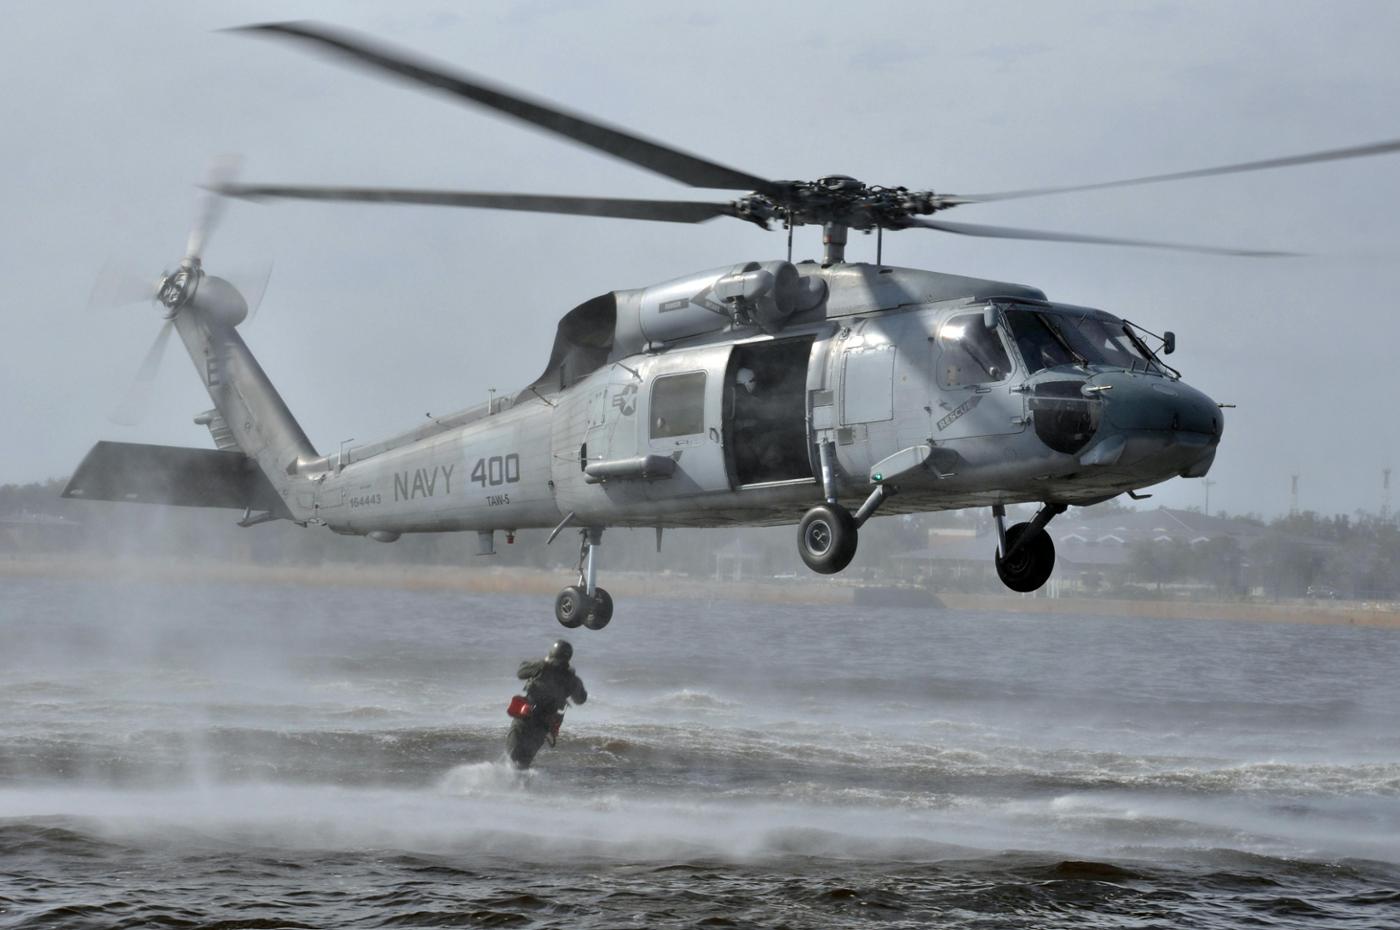 A search and rescue swimmer jumps from a US Navy SH-60F Sea Hawk helicopter. © US Navy
)